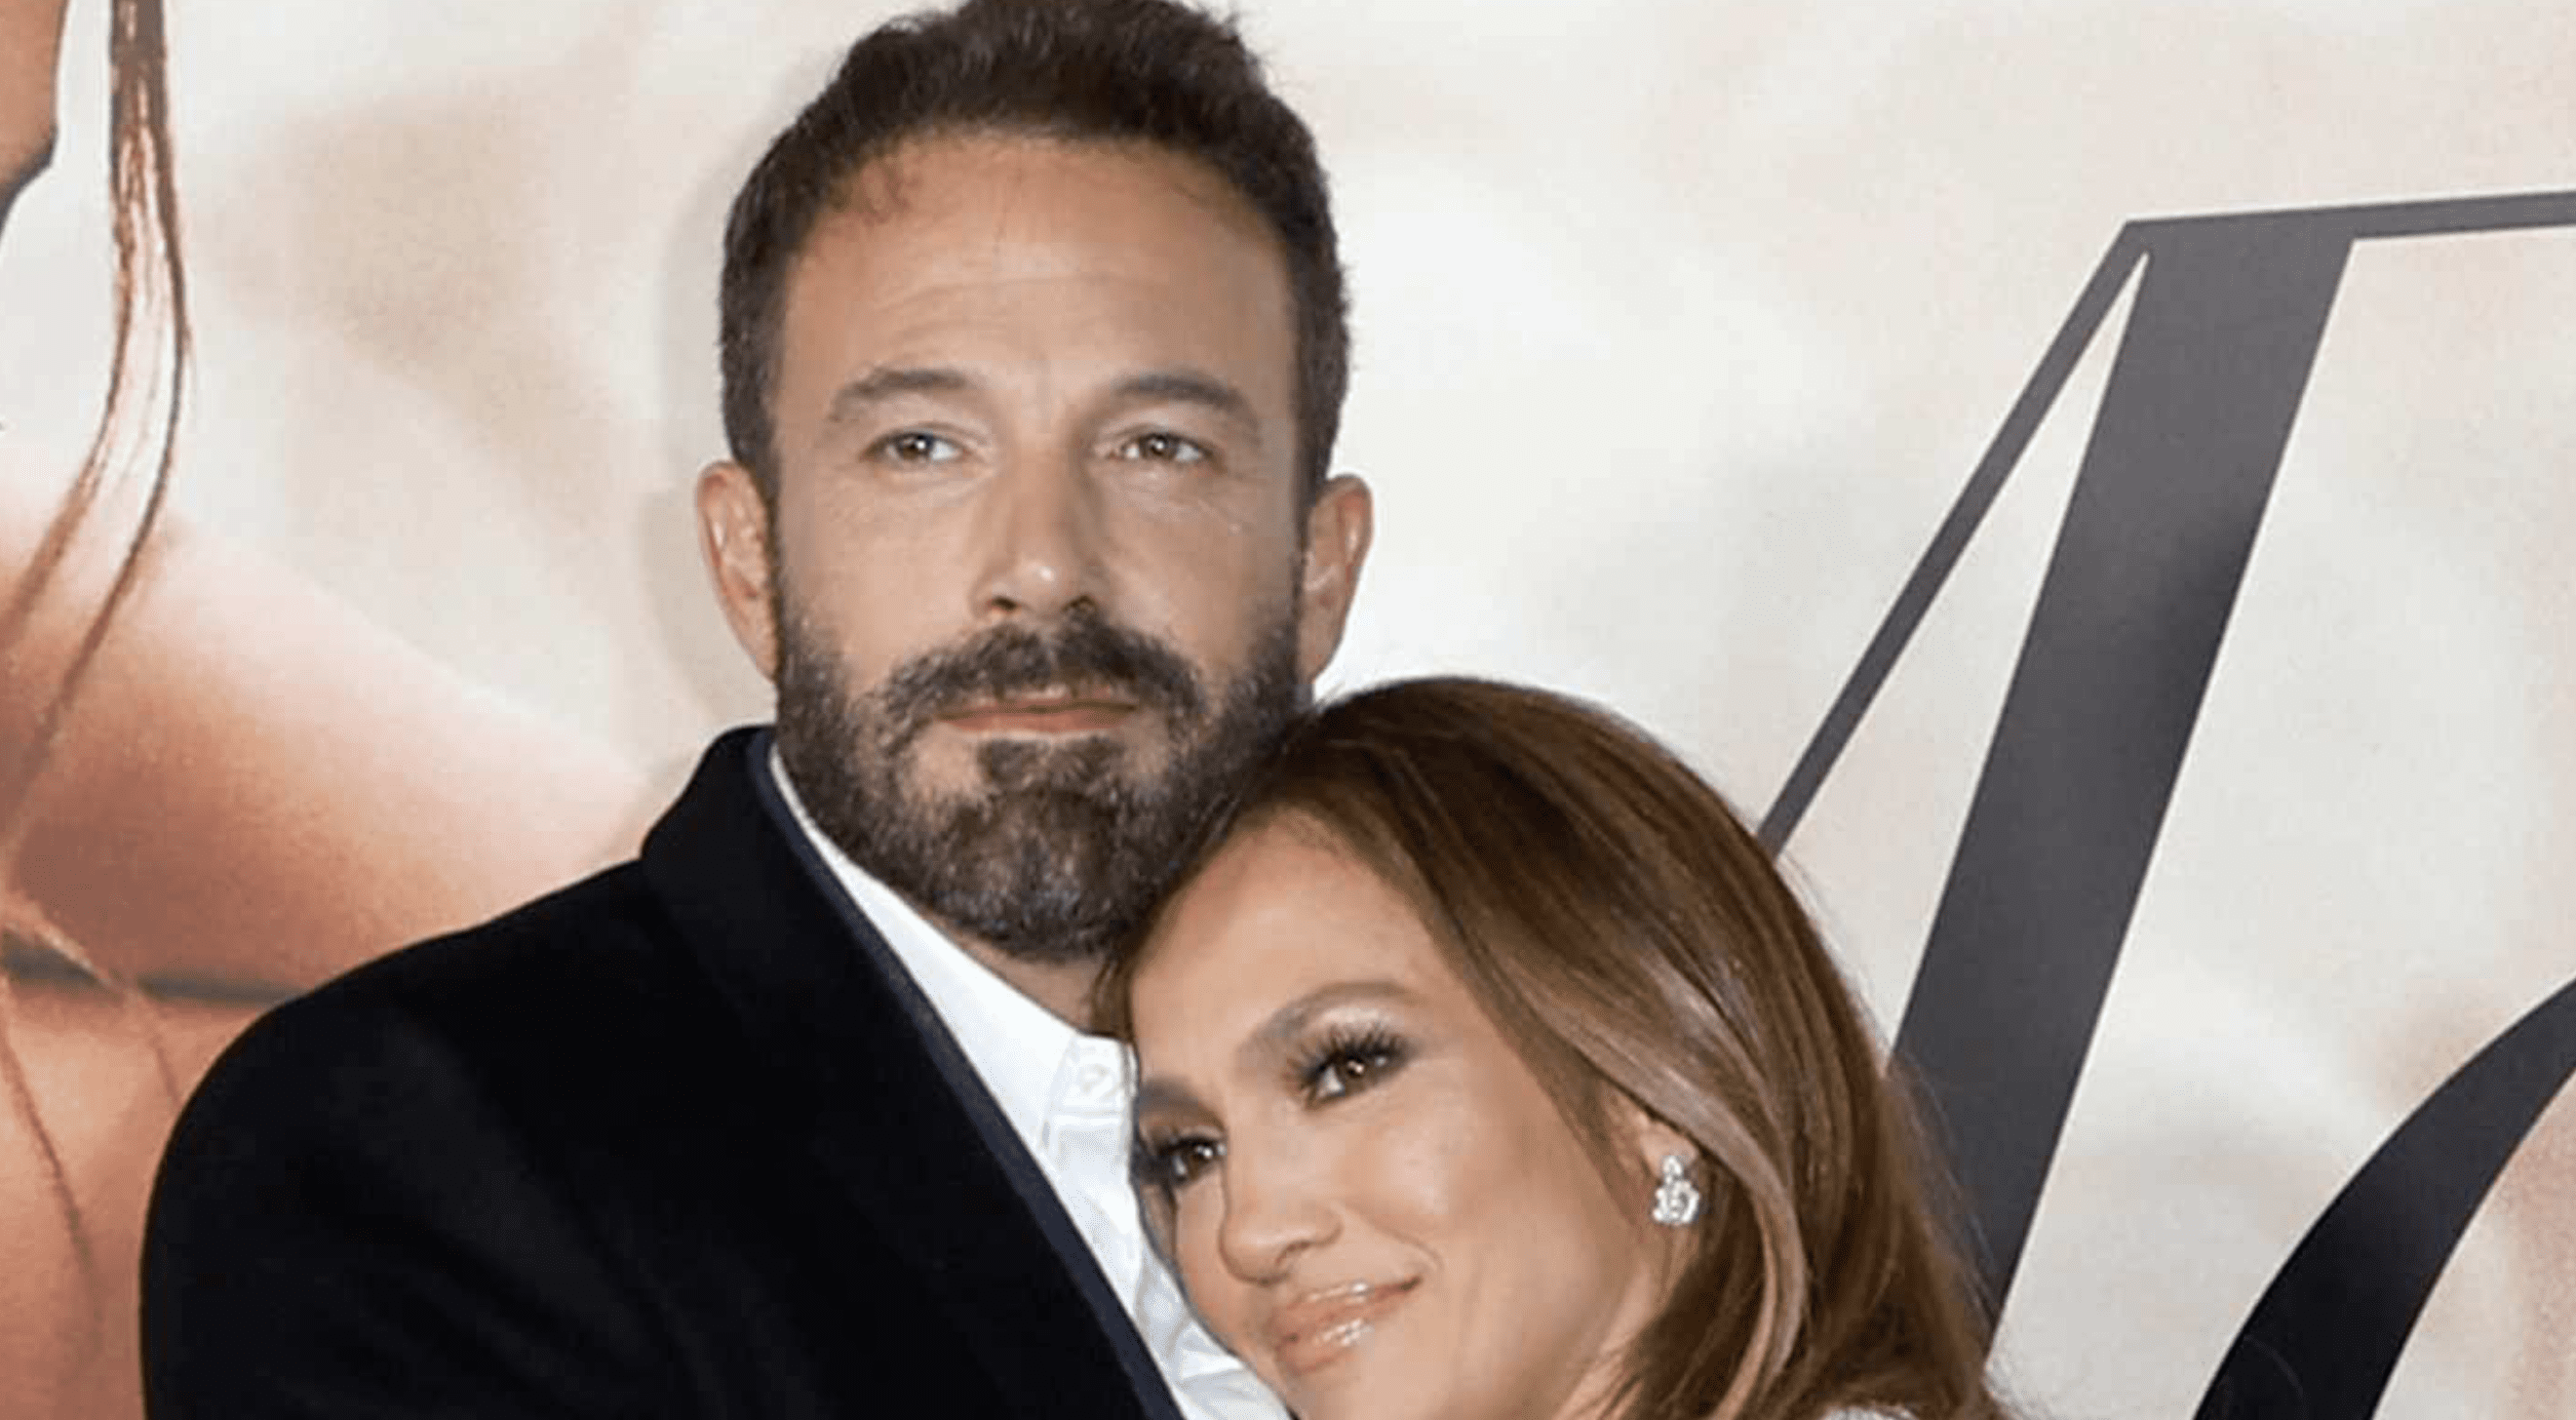 Jennifer Lopez and Ben Affleck’s Decision to Sell Their $61 Million Mansion: ‘It’s Way Too Big for Her’